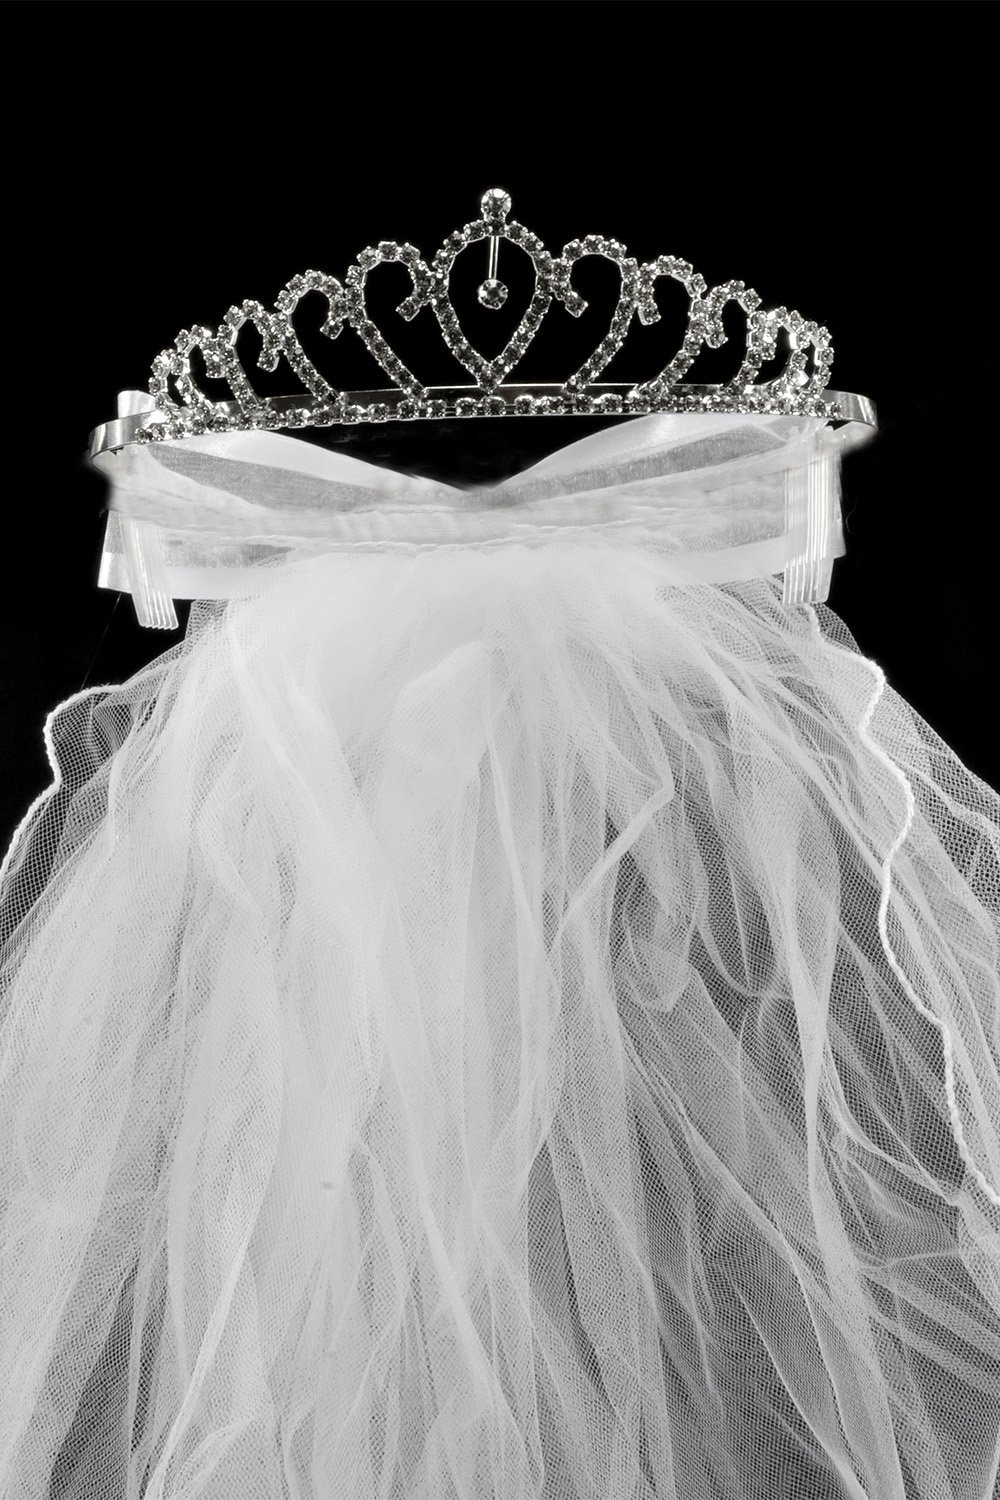 Wedding Veil With Tiara
 Lovely Rhinestone Tiara Attached to Double Layered Pencil